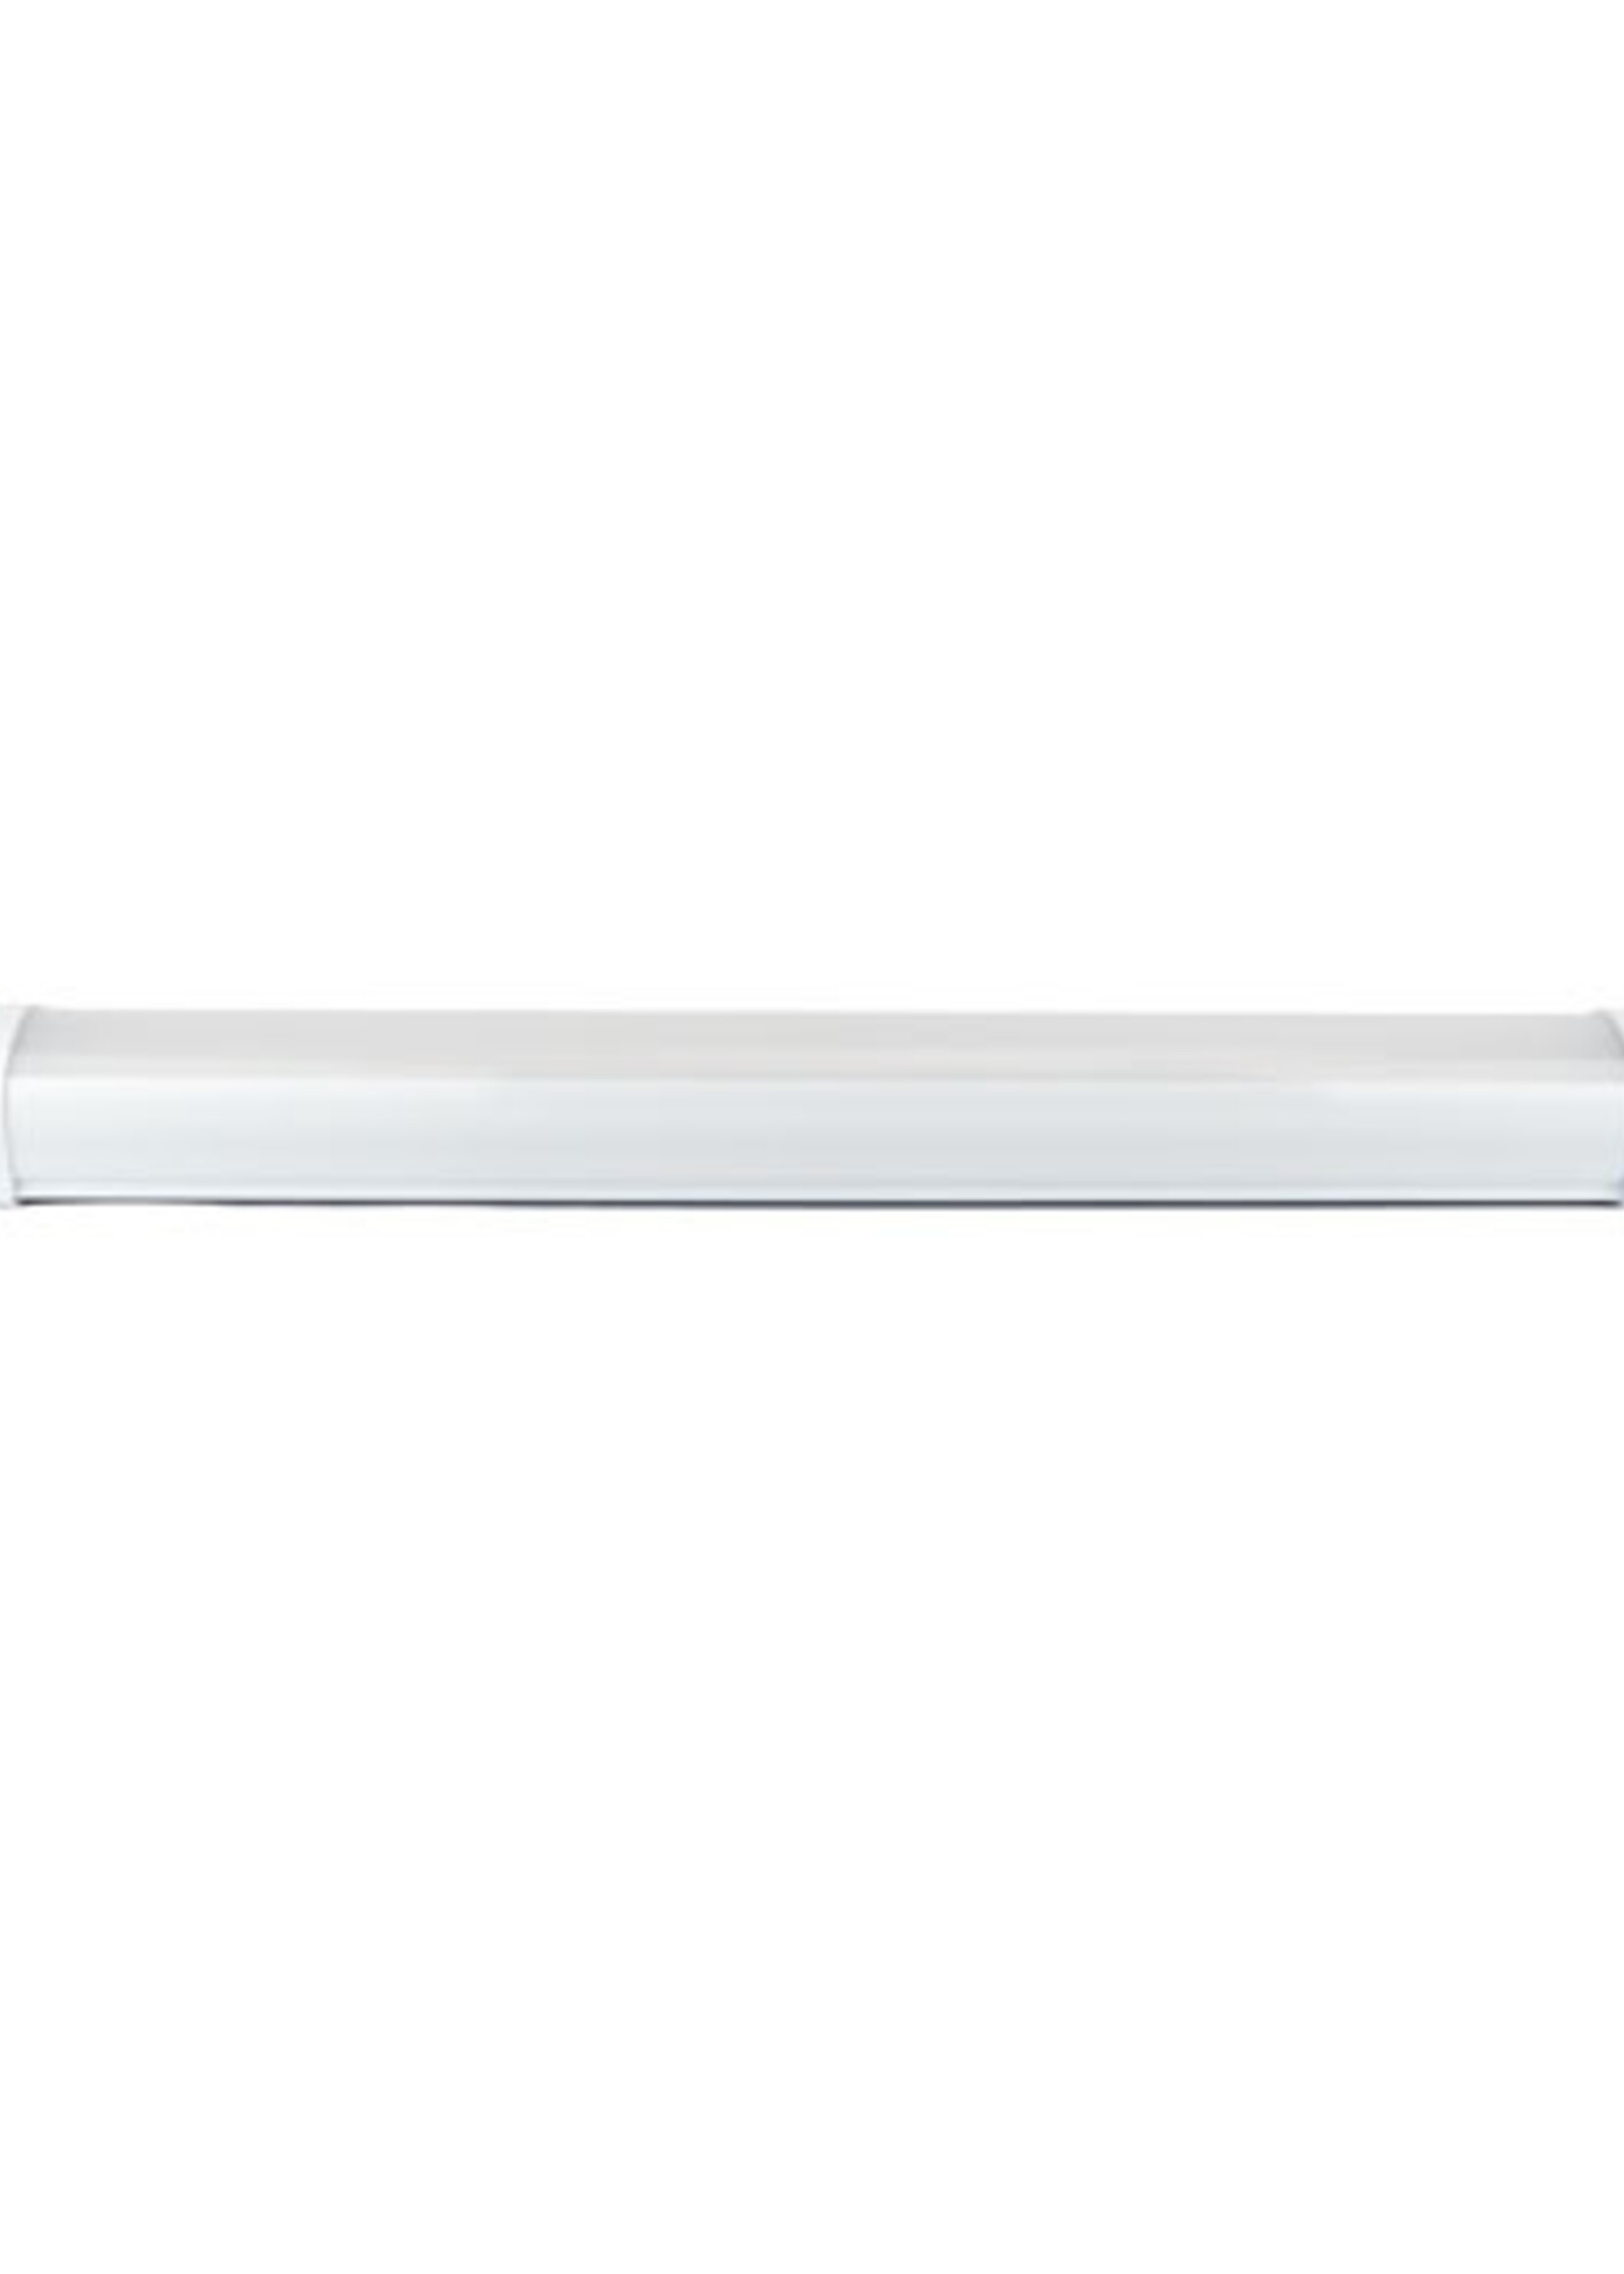 Philips CertaDrive Connectable LED Tri-proof IP65 water resistant 150cm 50W Philips driver